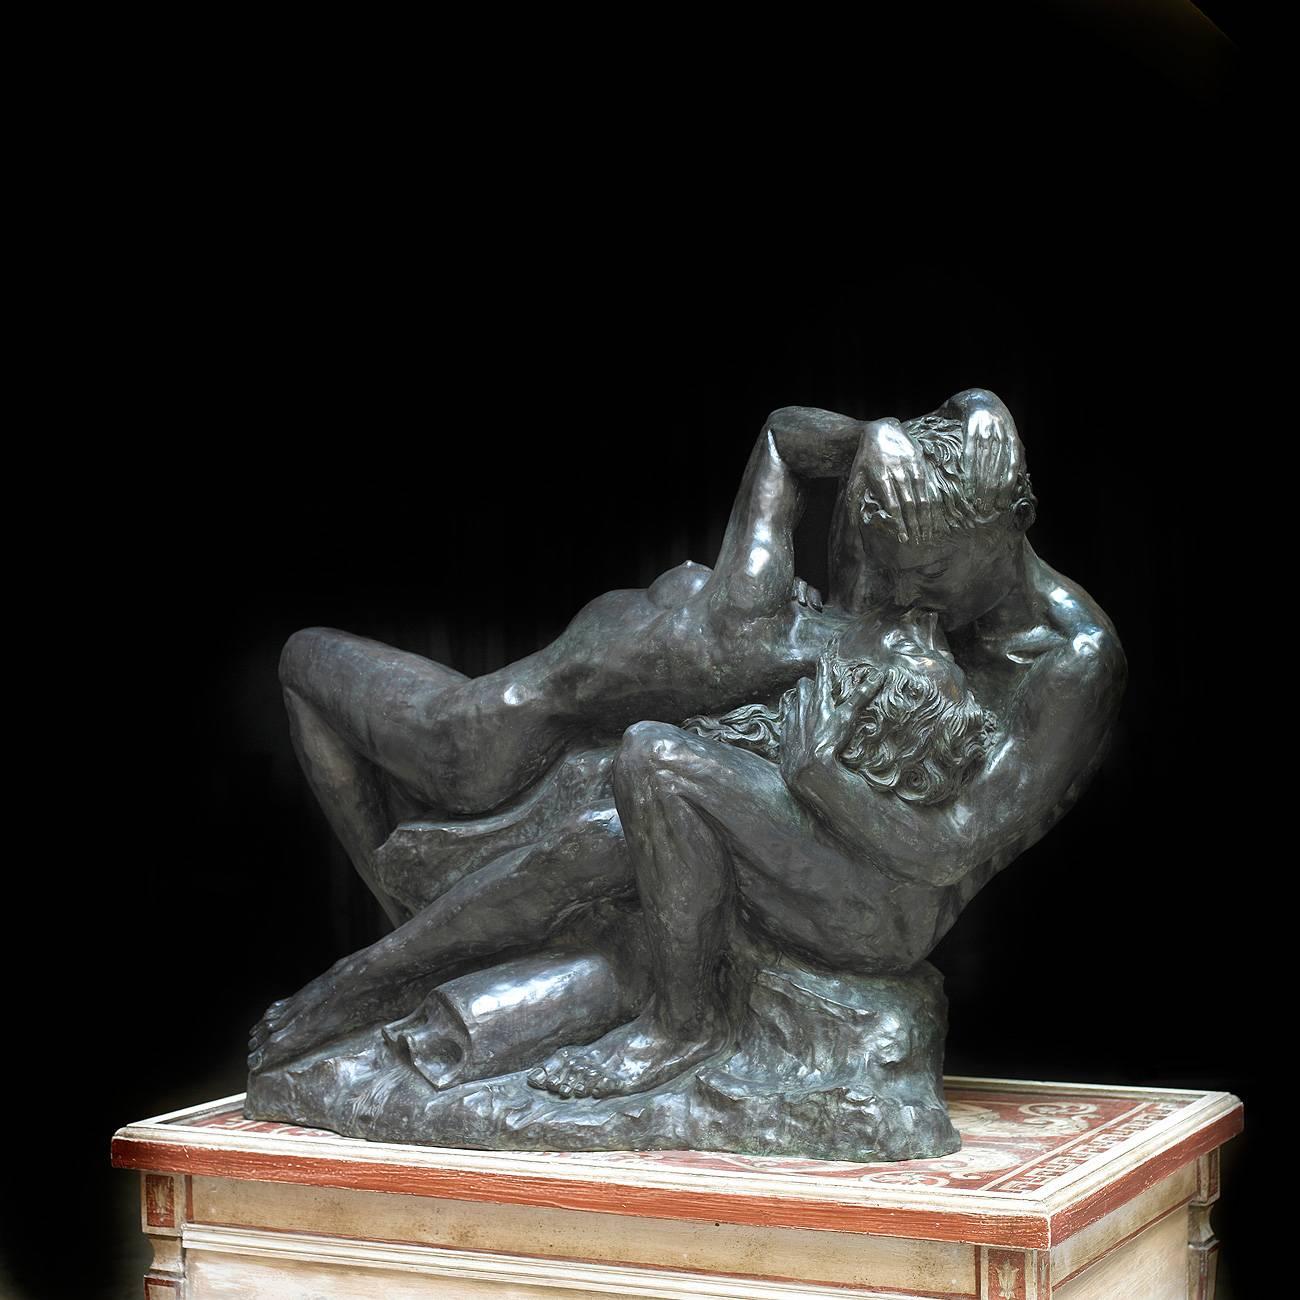 Homage to Camille Claudel Romeo & Juliet Very Impressive Bronze Sculpture 500lbs
Extraordinary and significant bronze sculpture, France, 20th century

The artist has created a work that solidifies the expressive, sensual and triumphant